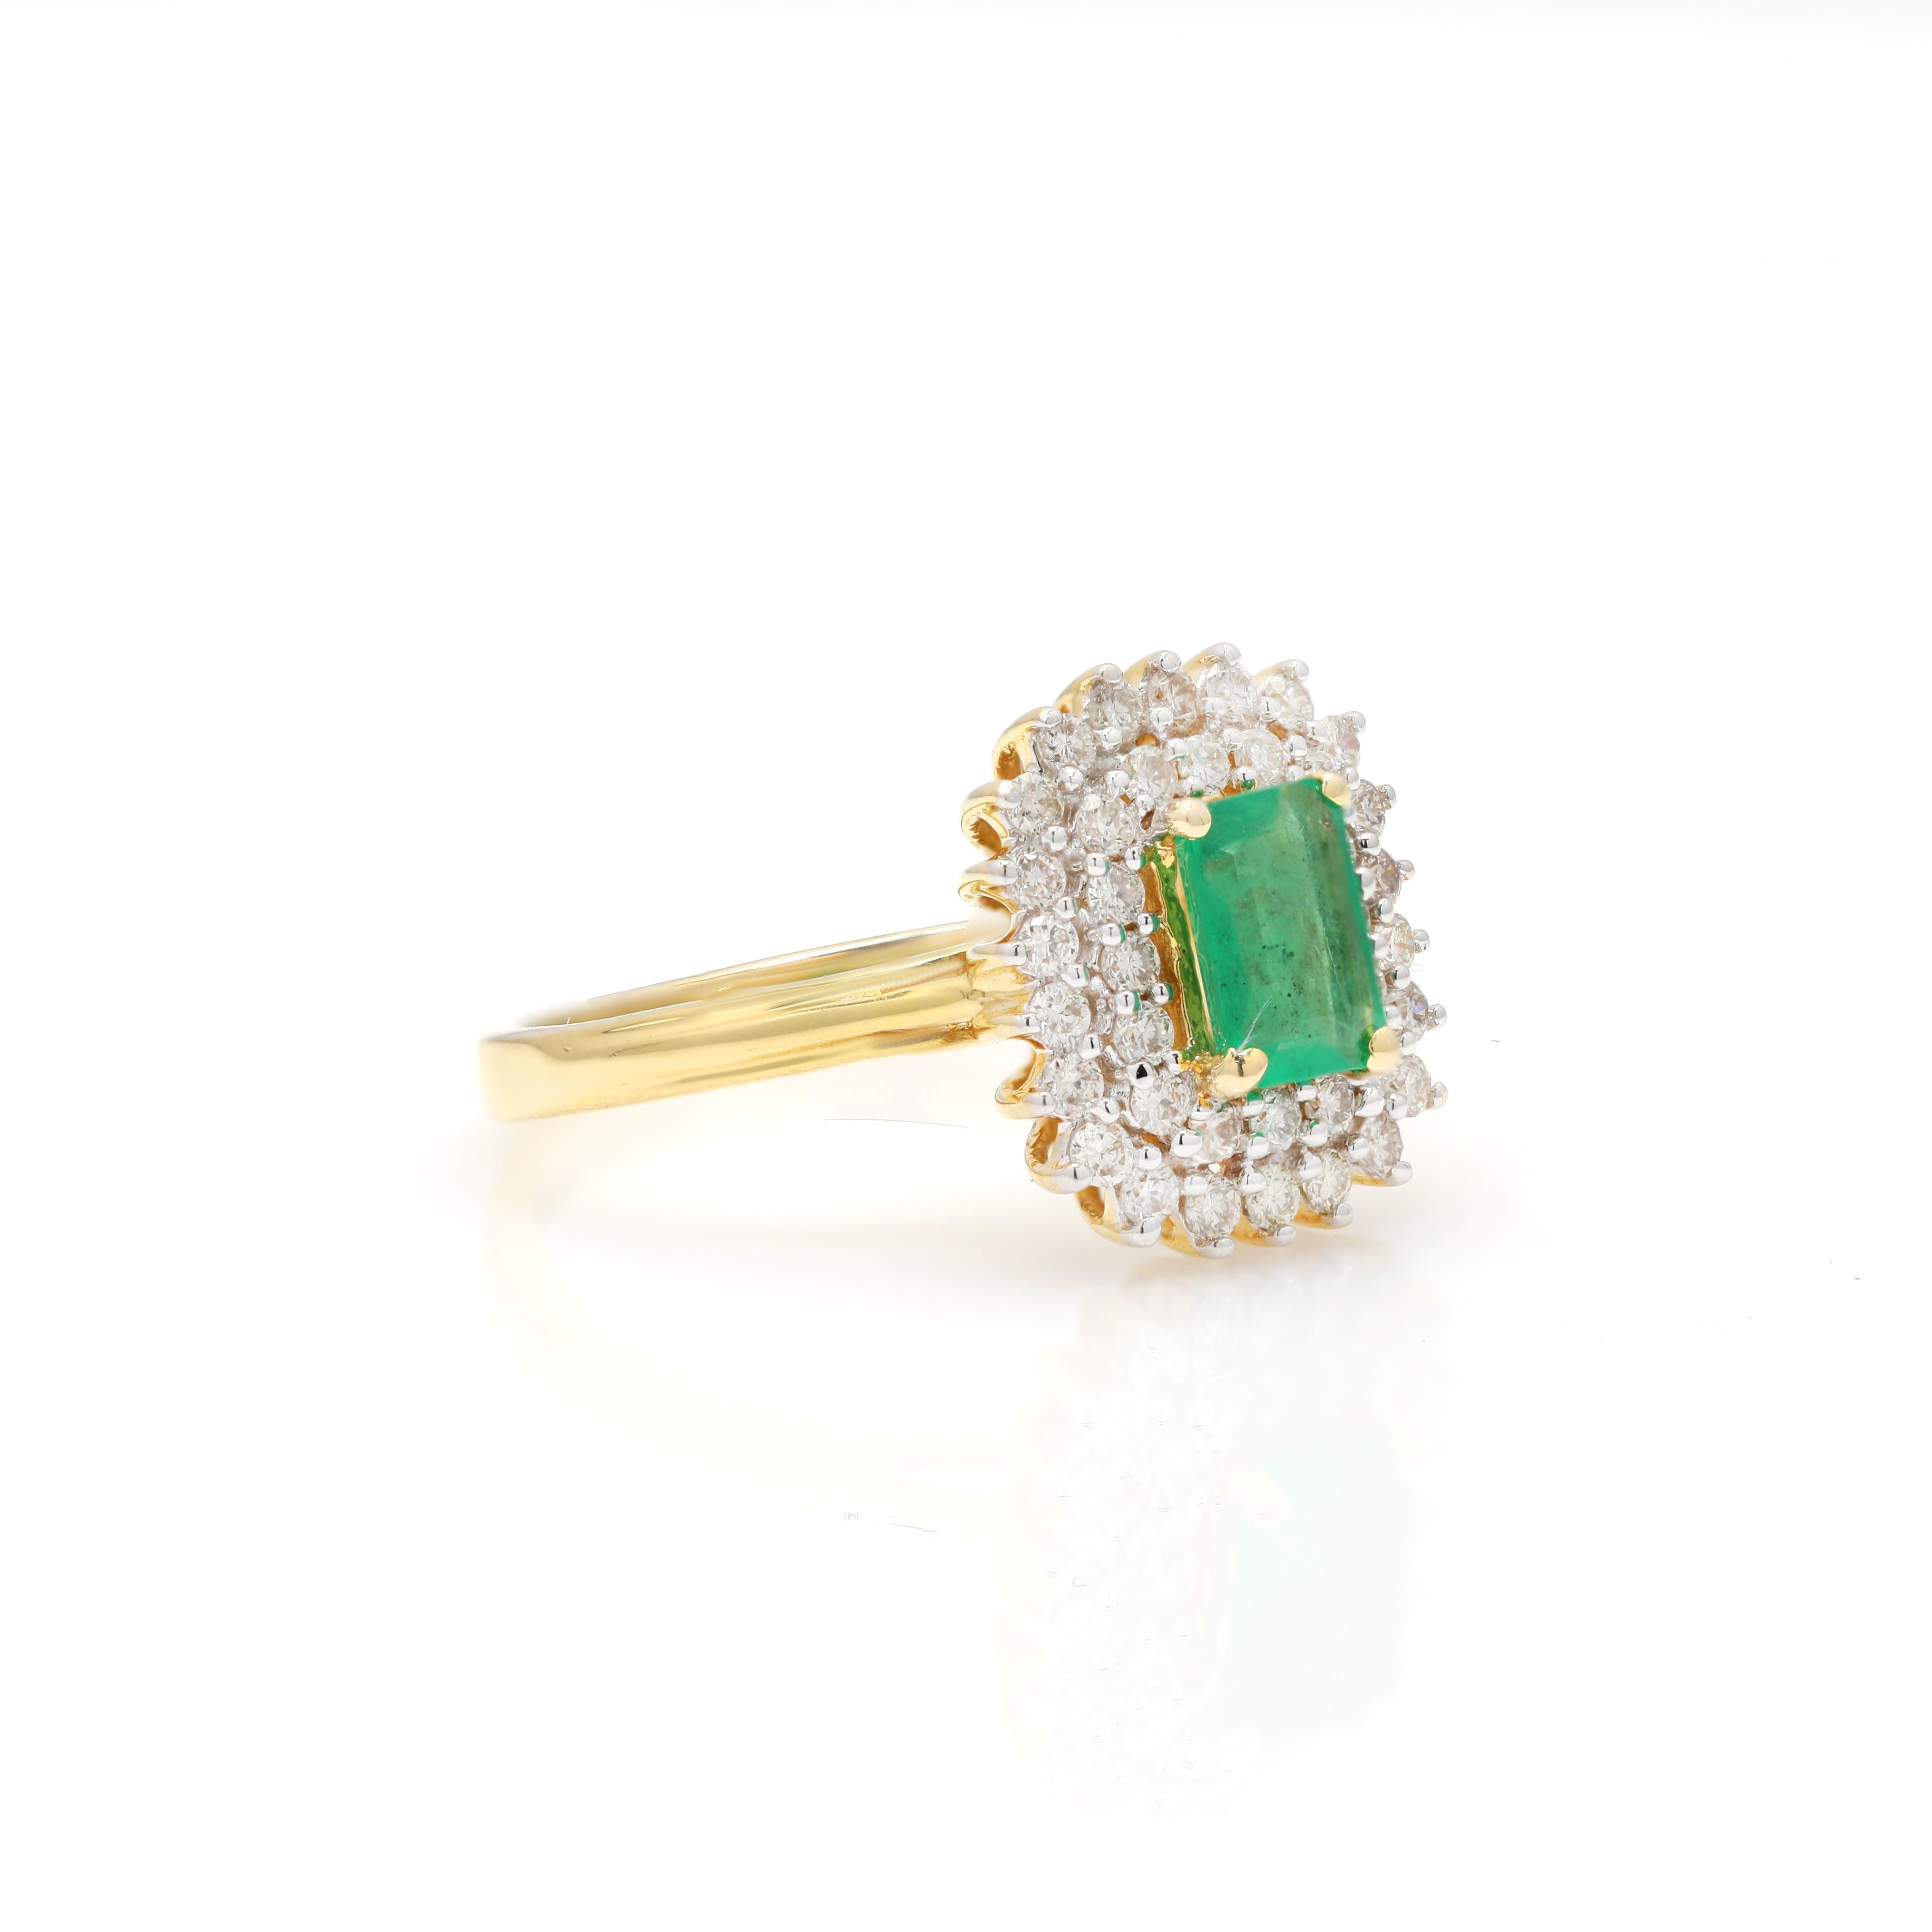 For Sale:  Bespoke Octagon Cut Emerald Amidst of Diamond Wedding Ring in 18k Yellow Gold 2